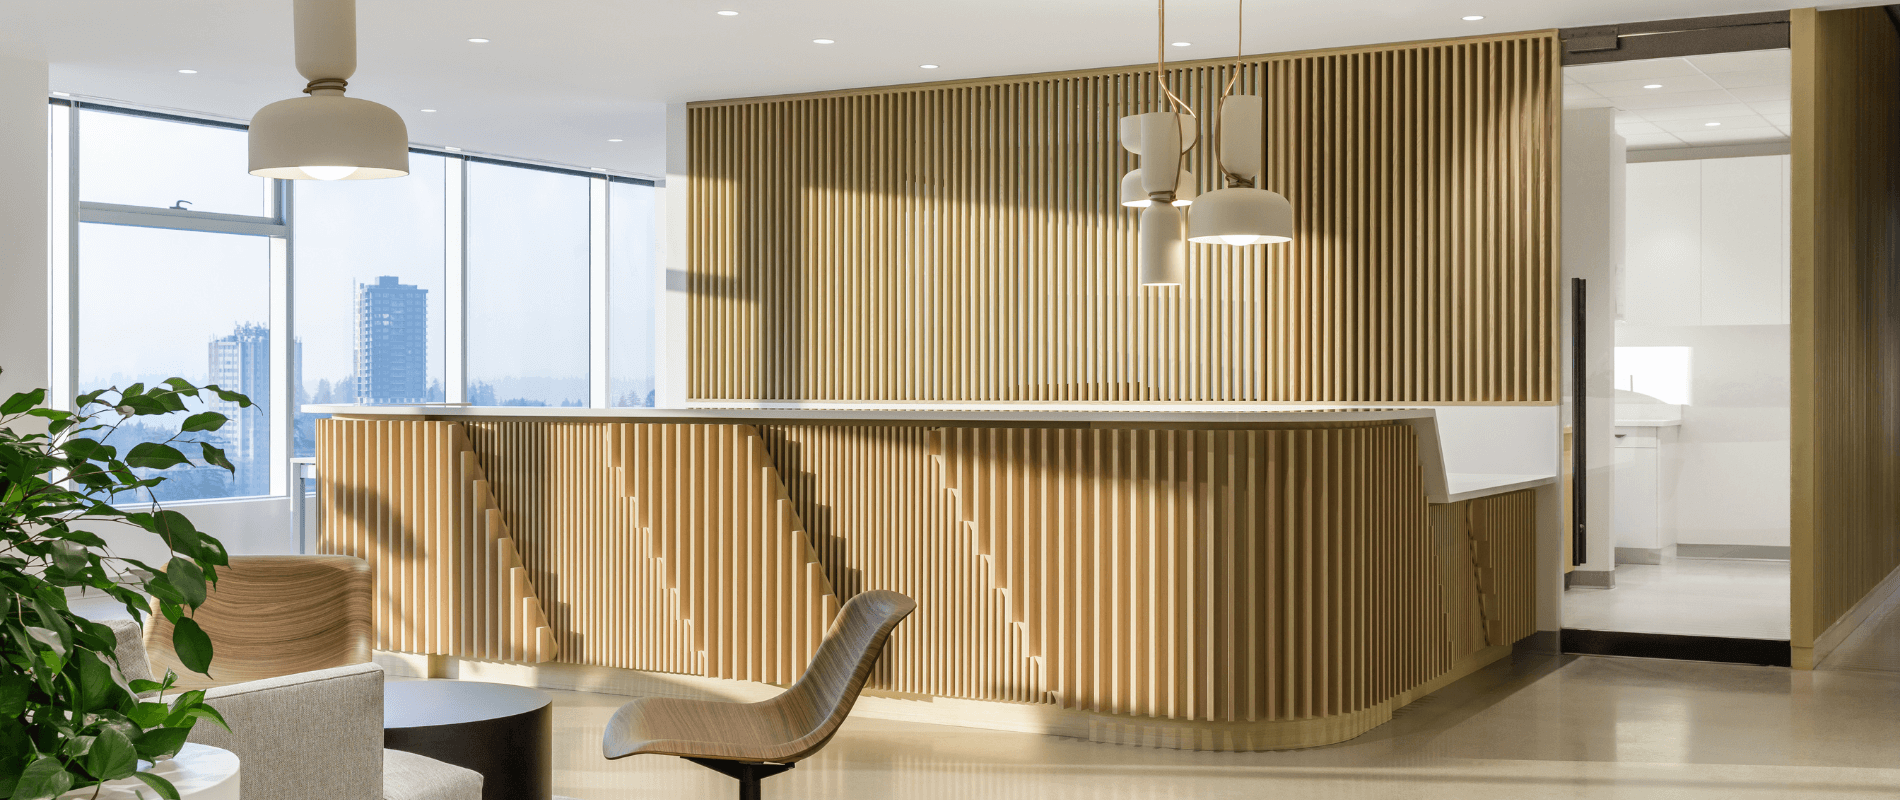 Aura Office | Strategic Workplace Design: Blending Aesthetics with Functionality